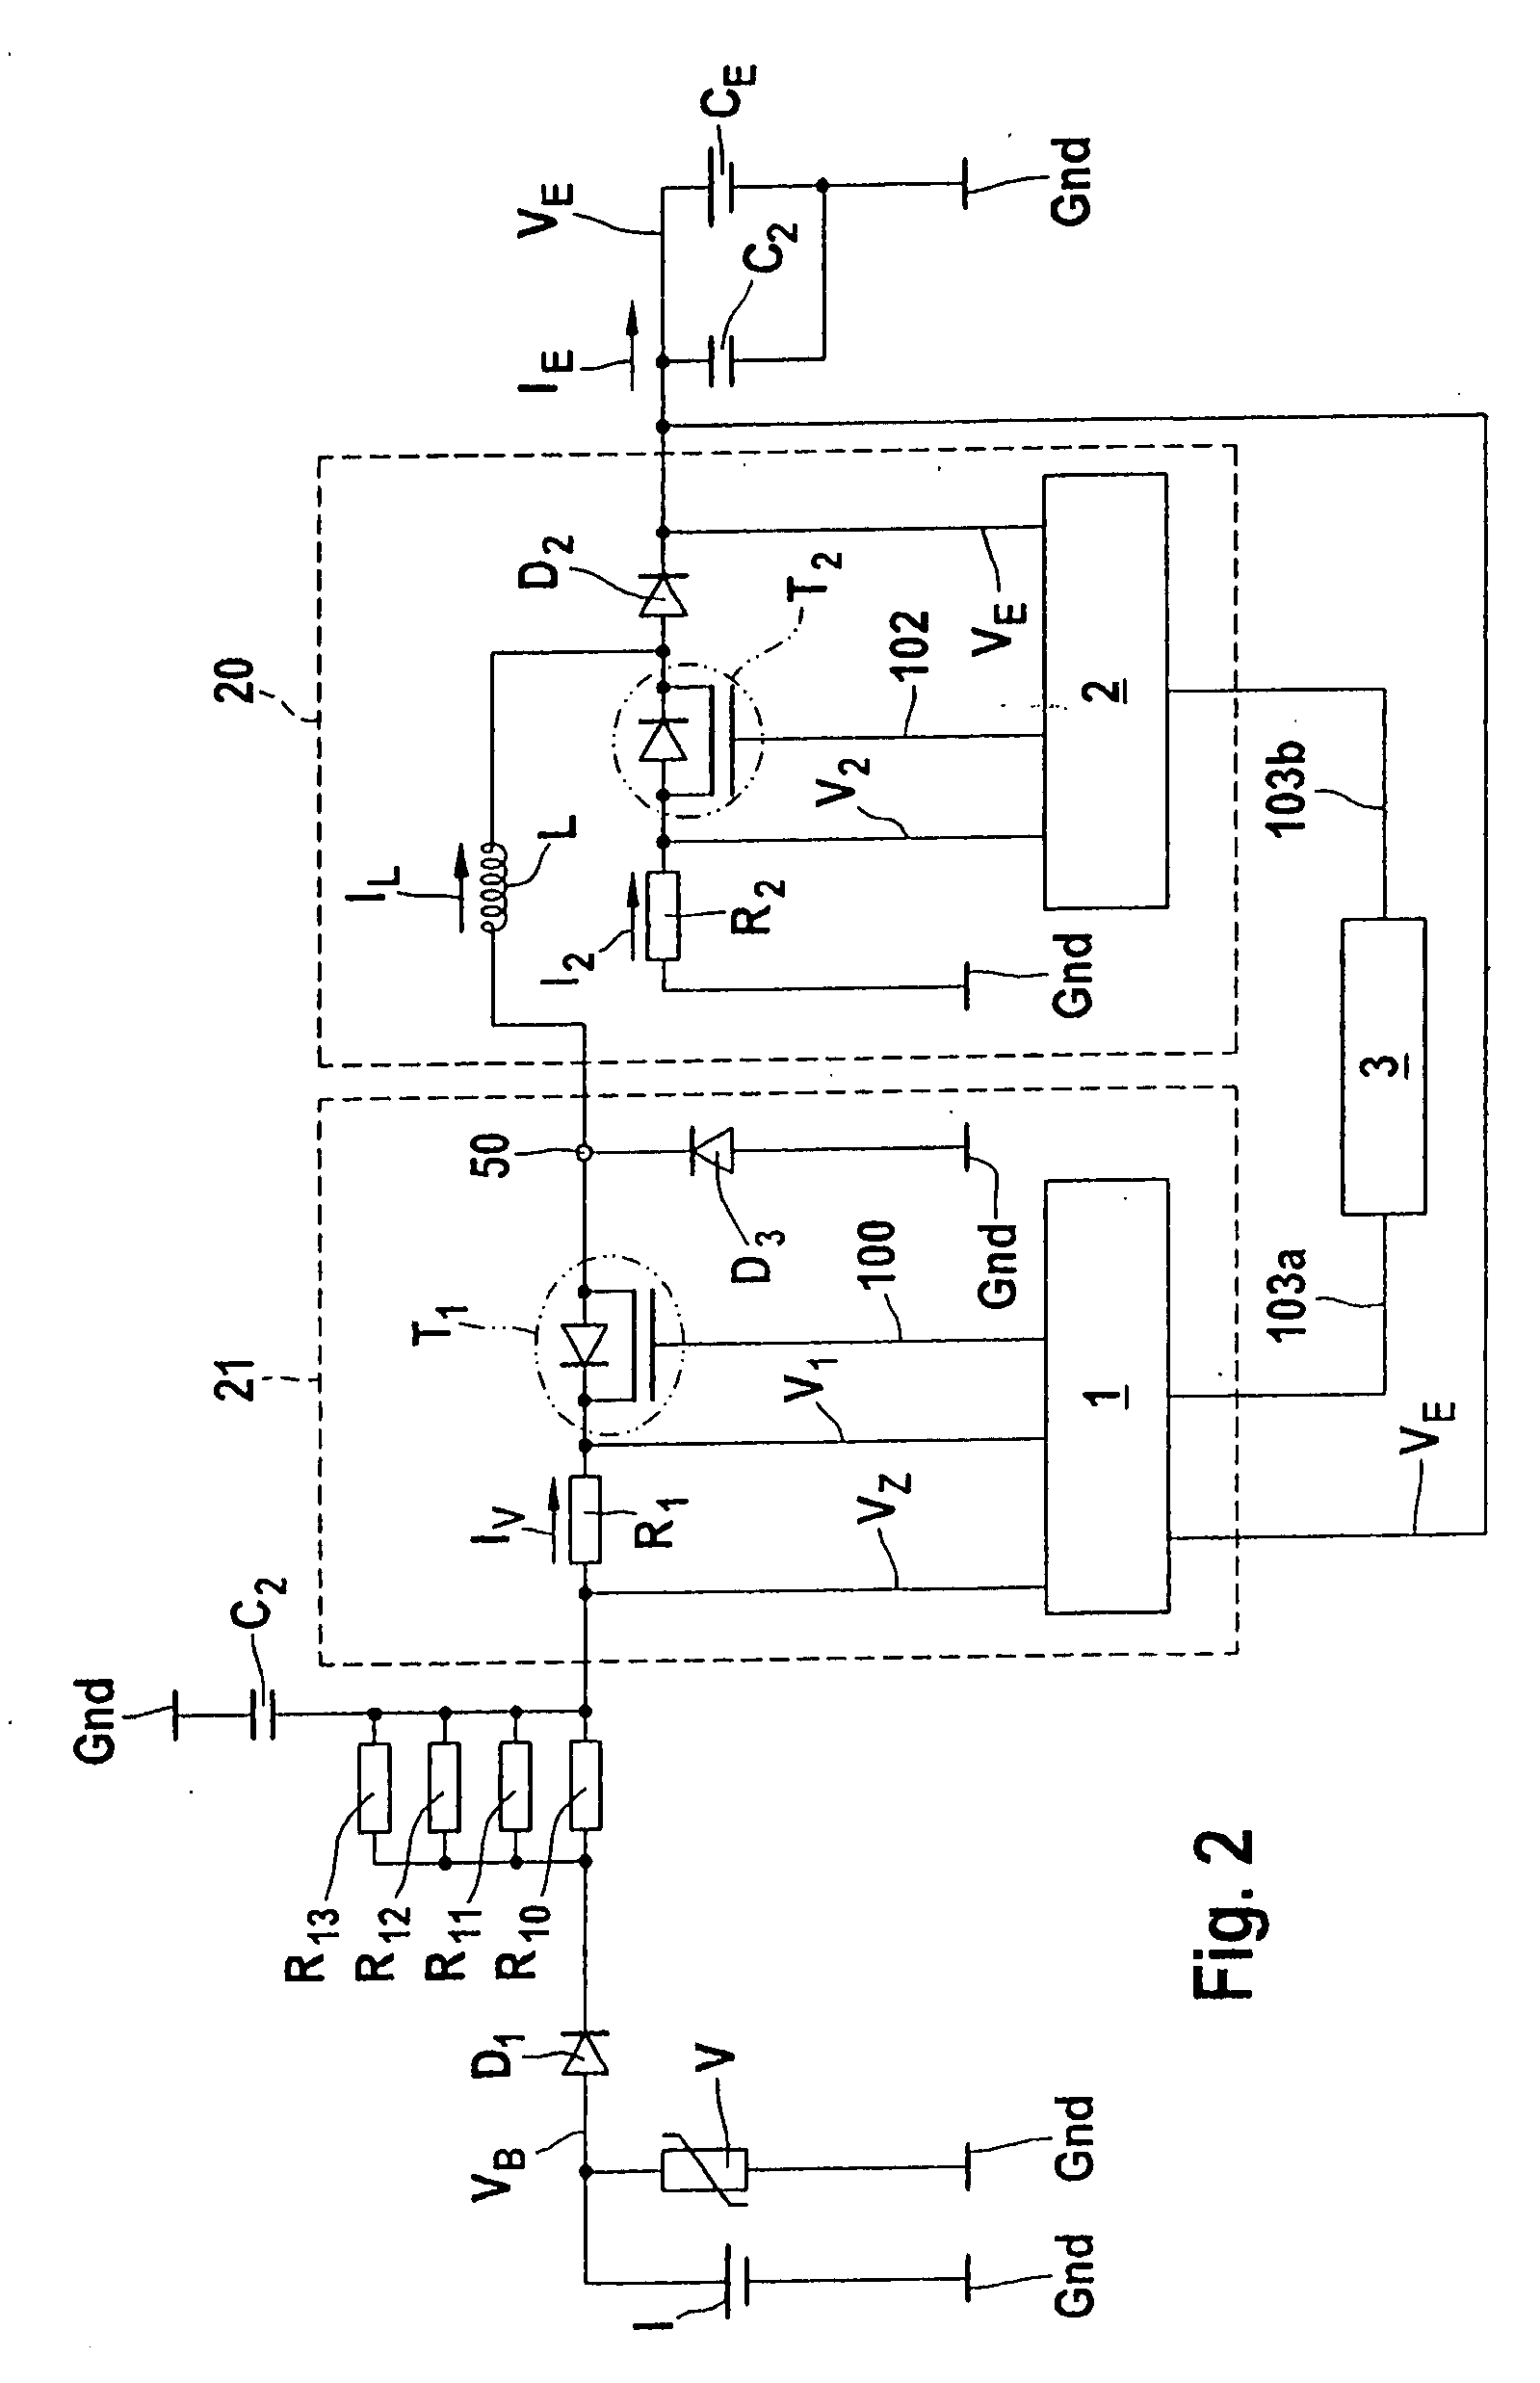 Device and Method For Charging an Electrical Energy Storage Device